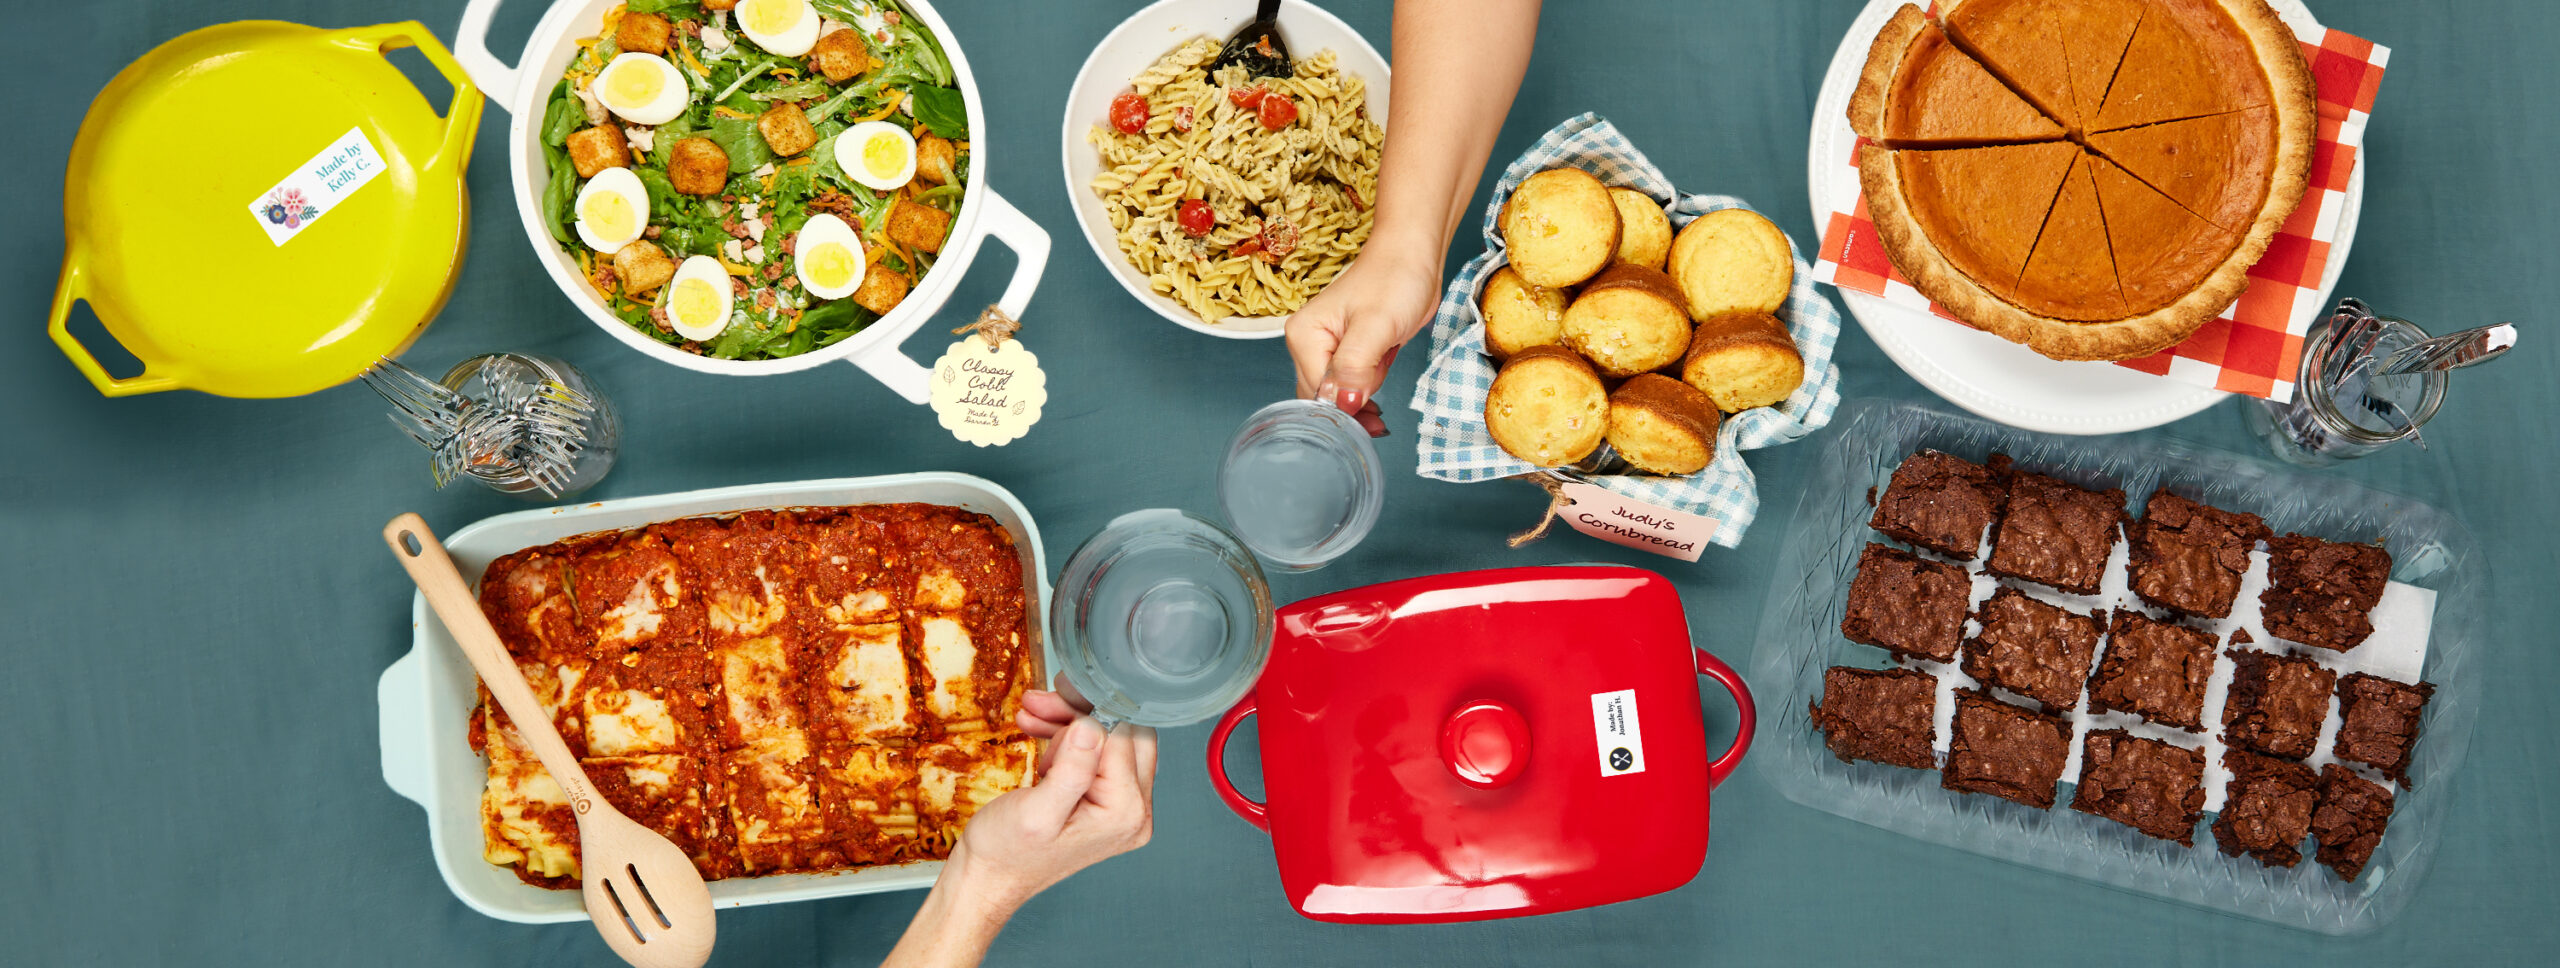 10-festive-and-practical-ideas-for-a-potluck-at-work-avery